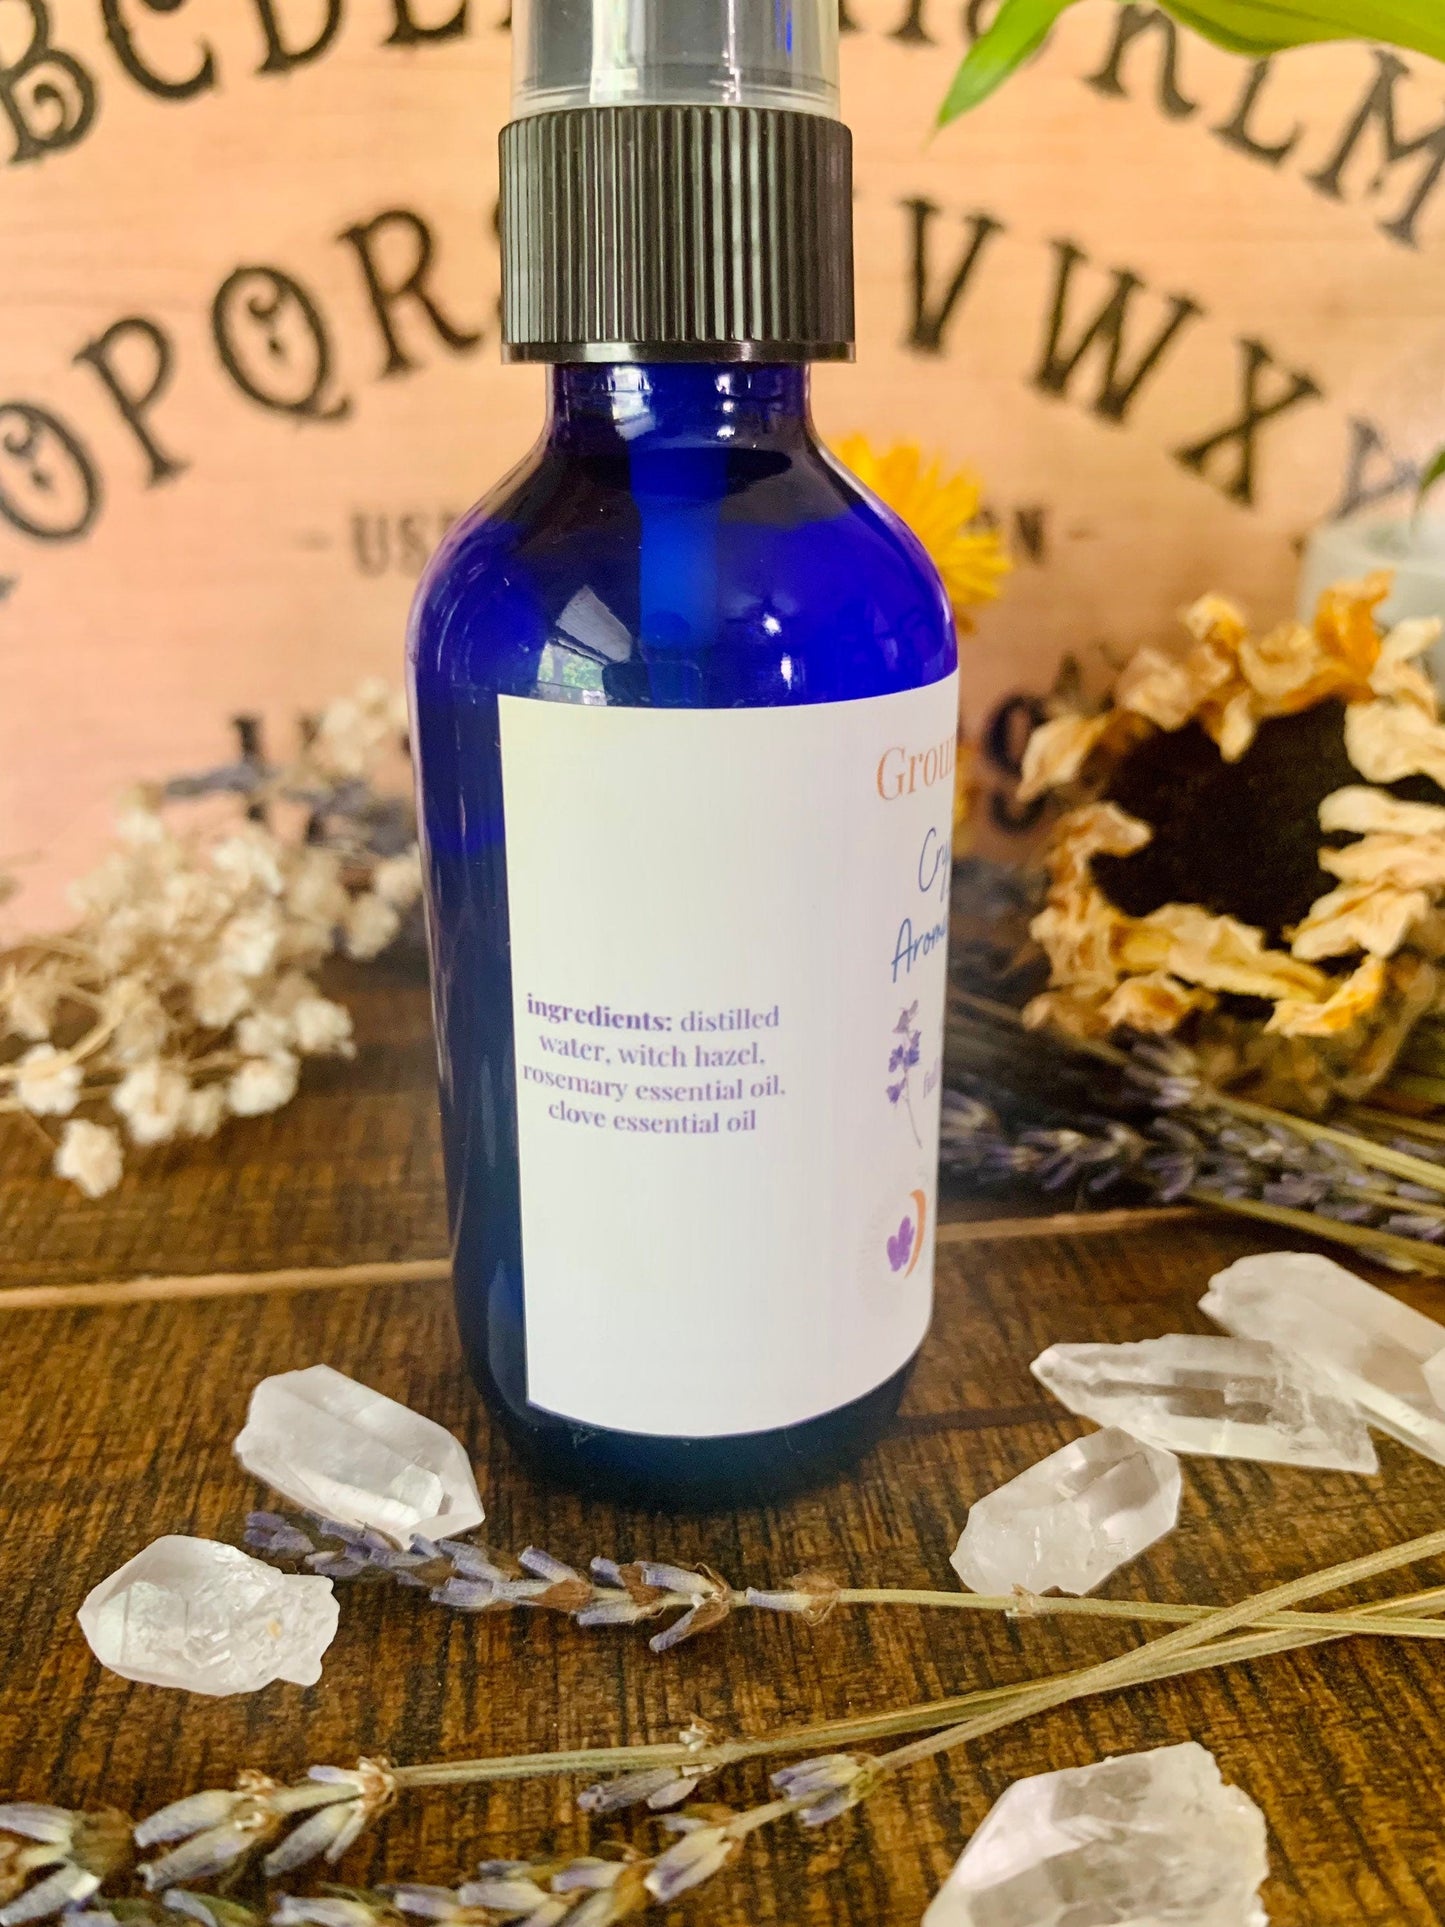 ground & cleanse crystal-infused aromatherapy mist - Lil Shop of Light & Love